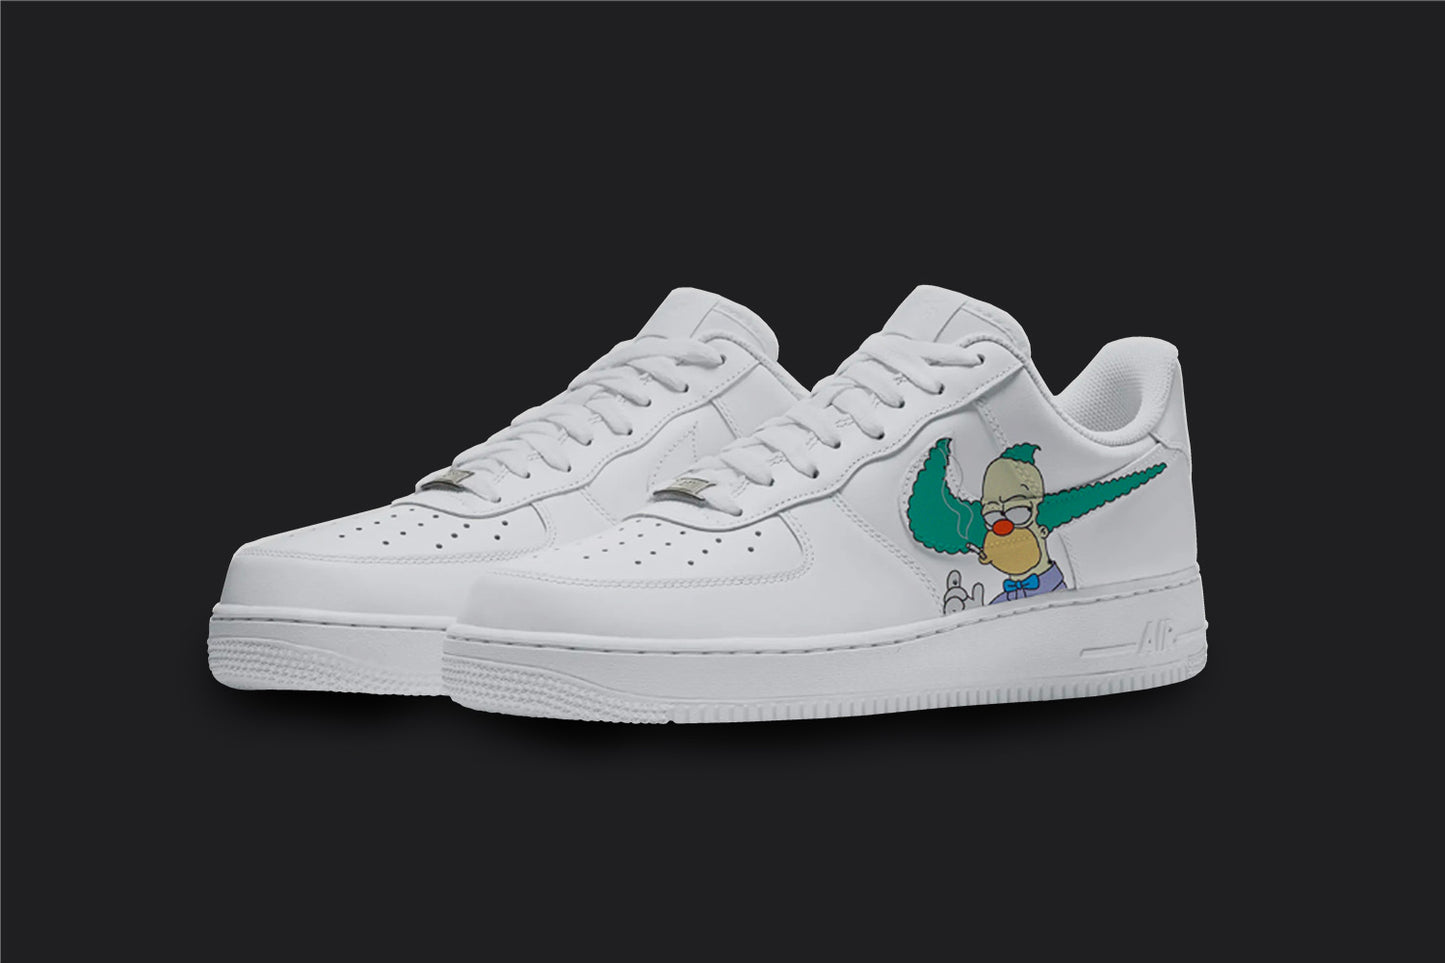 The image is of a Custom Nike Air force 1 sneaker pair on a blank black background. The white custom sneakers have a krusty the clown from simpsons design on the side of the shoes.